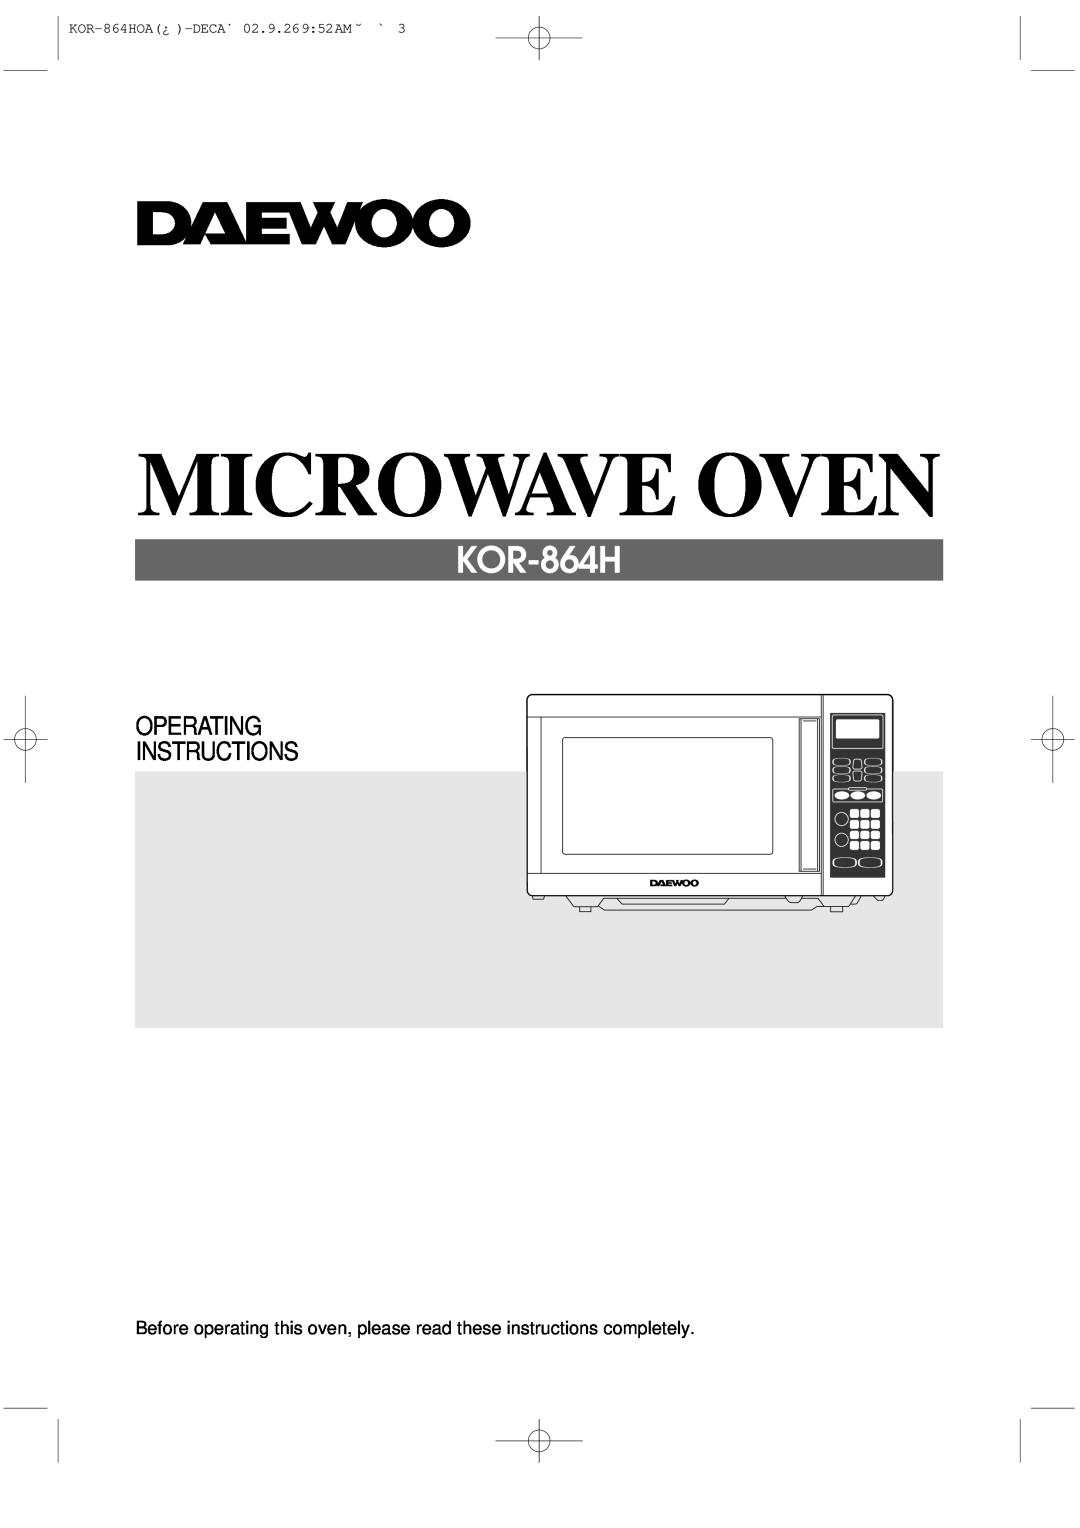 Daewoo operating instructions Microwave Oven, Operating Instructions, KOR-864HOA¿ -DECA˙02.9.269 52AM ˘ ` 